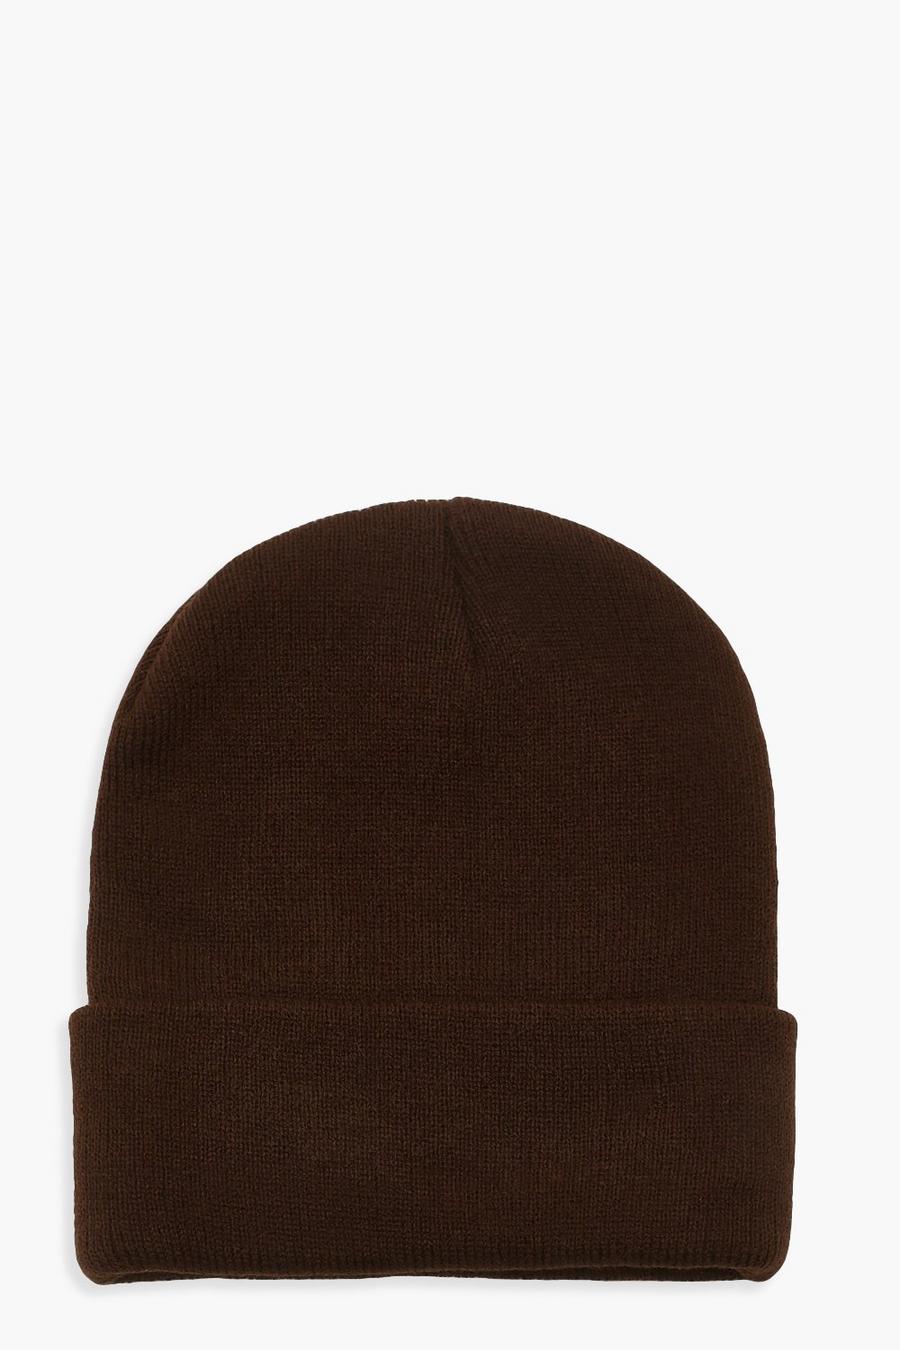 Chocolate brown Basic Beanie Hat image number 1